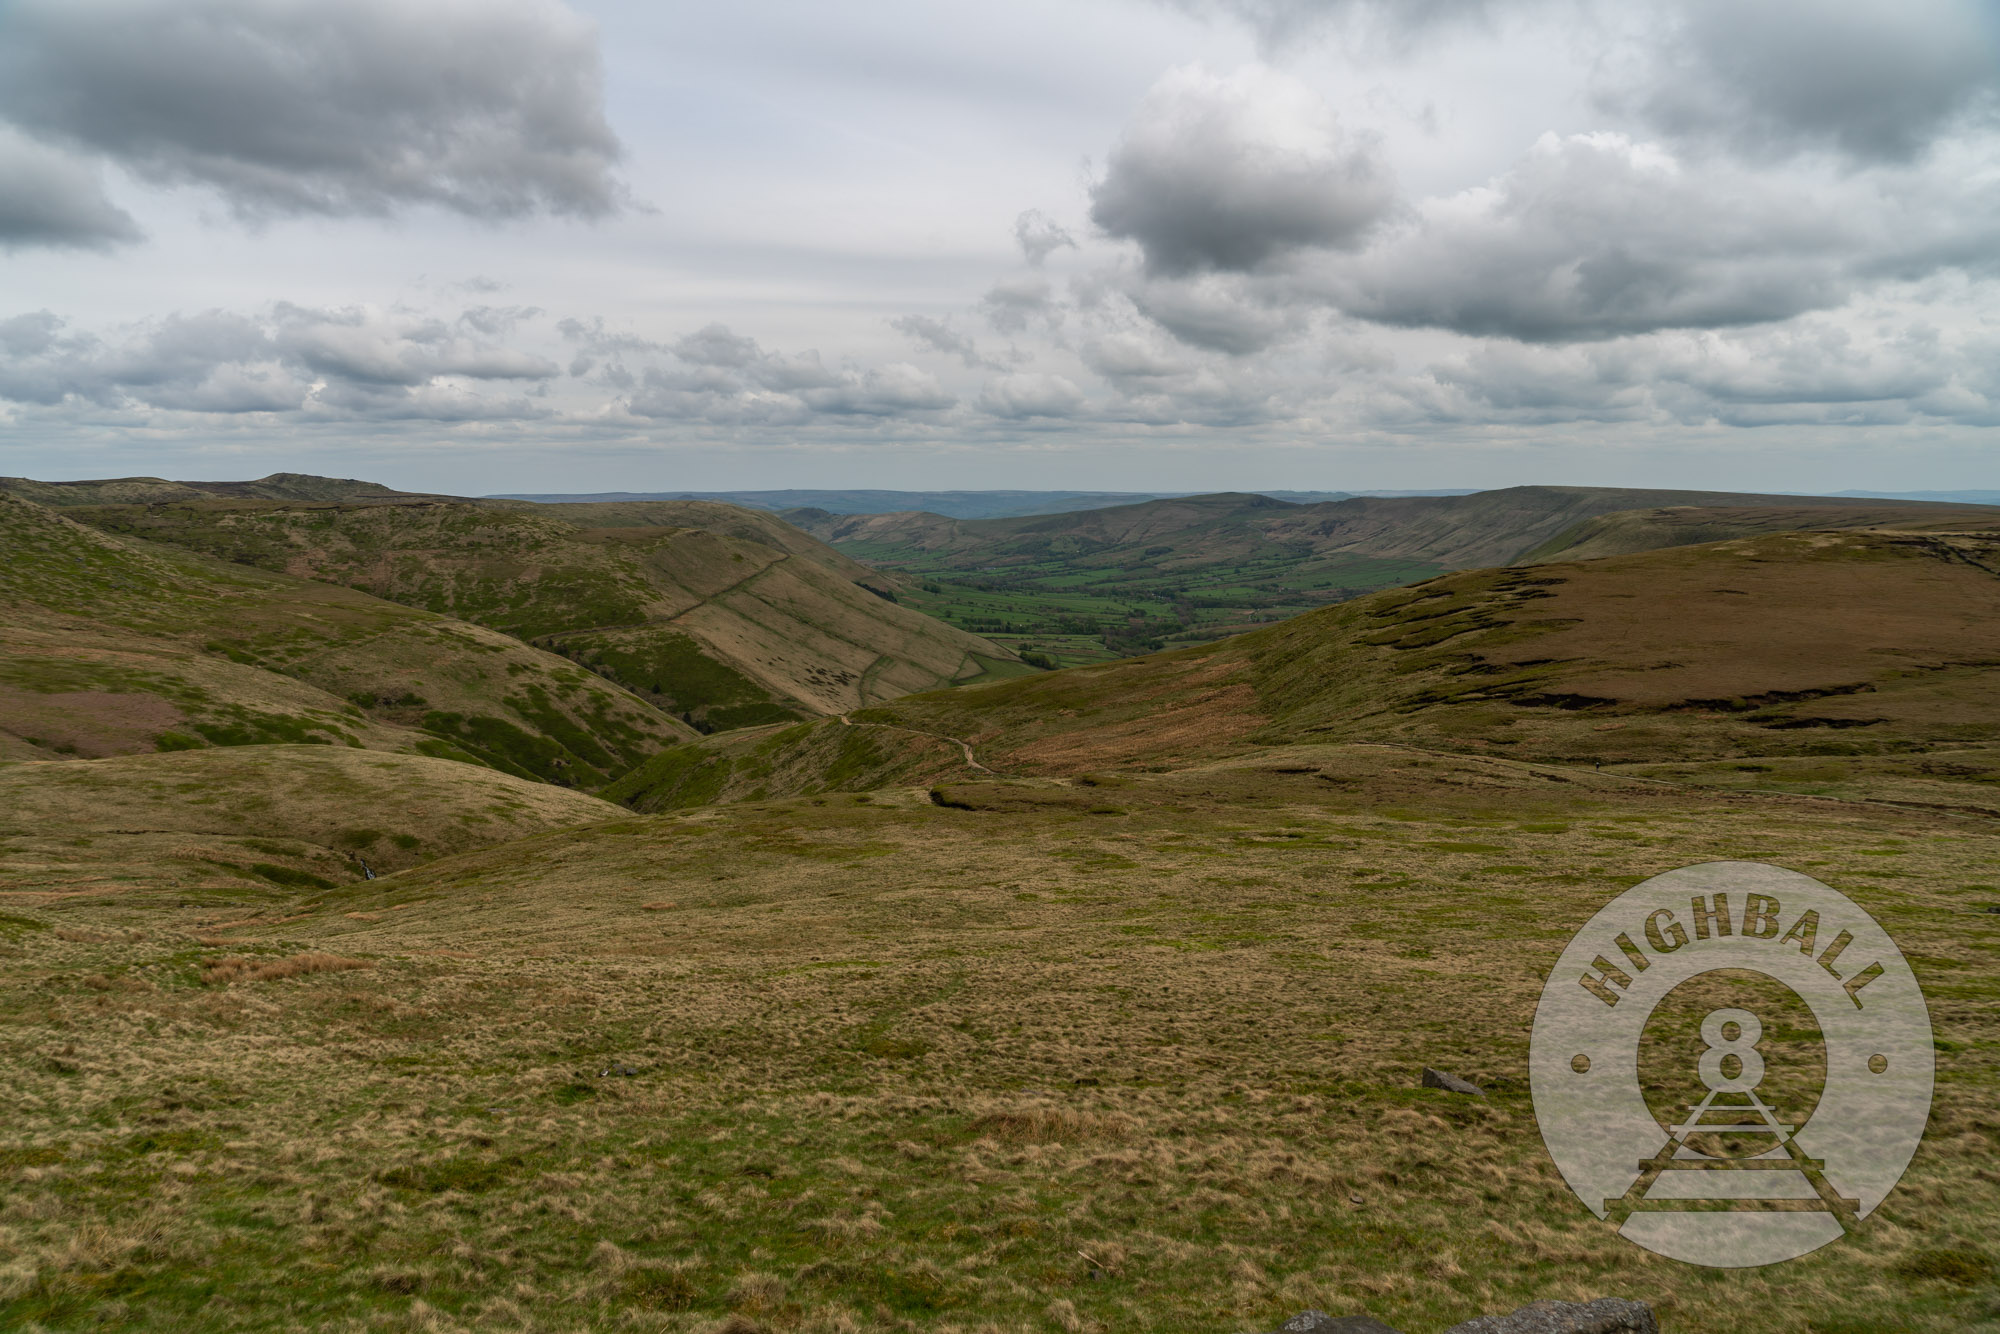 The top of Jacob's Ladder looking east over the Vale of Edale, Peak District, Derbyshire, England, UK, 2018.